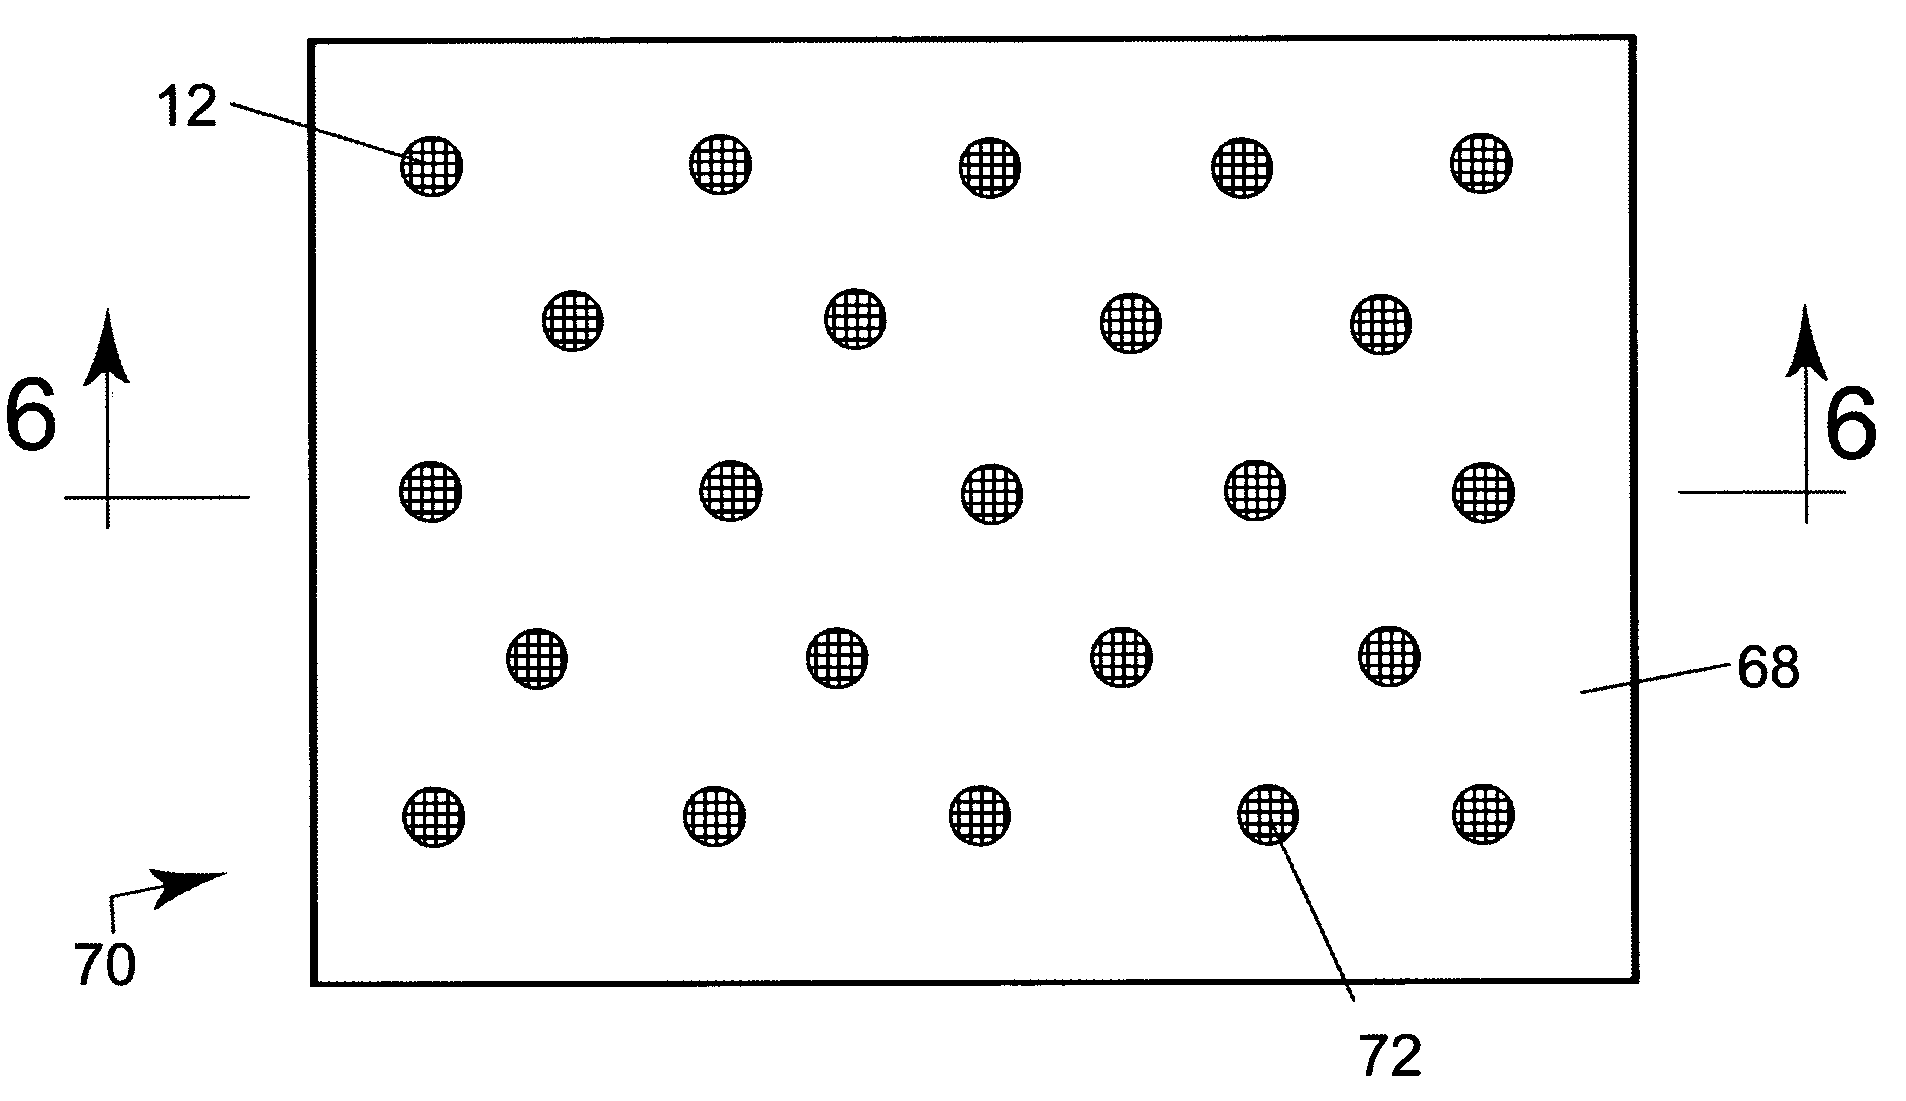 Method for manufacturing resin-impregnated endless belt and a belt for papermaking machines and similar industrial applications